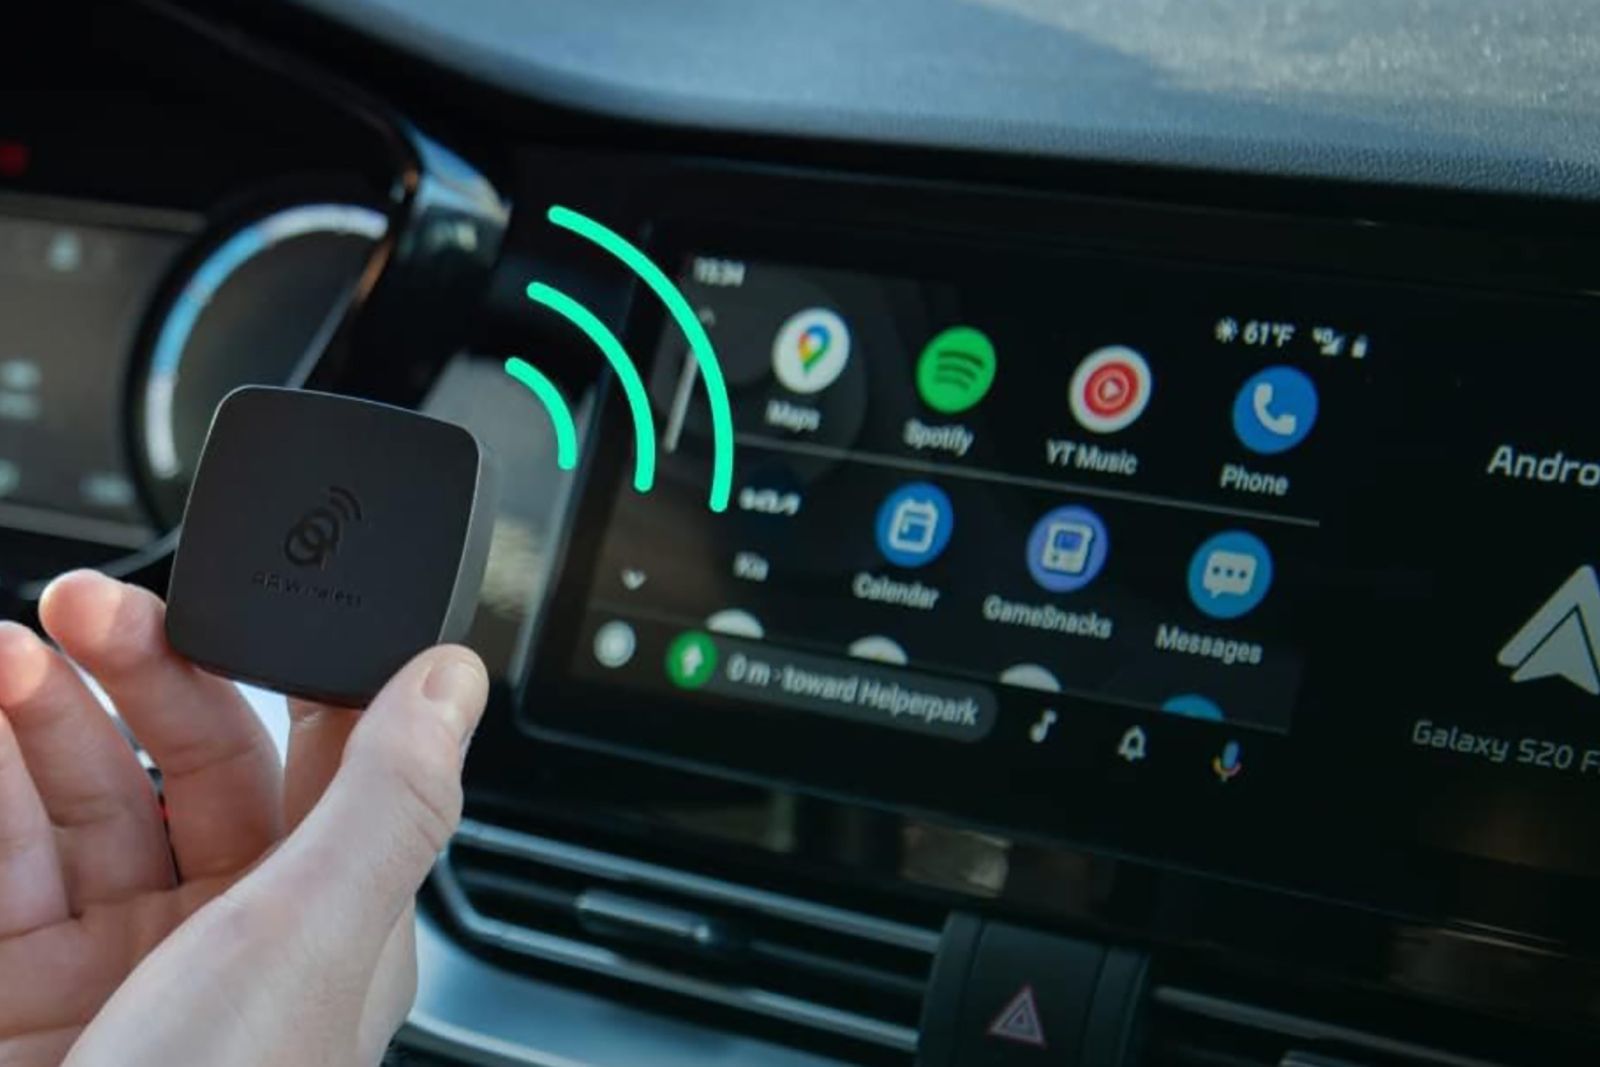 AAWireless 2023 - Wireless Android Auto Dongle - Connects automatically  to